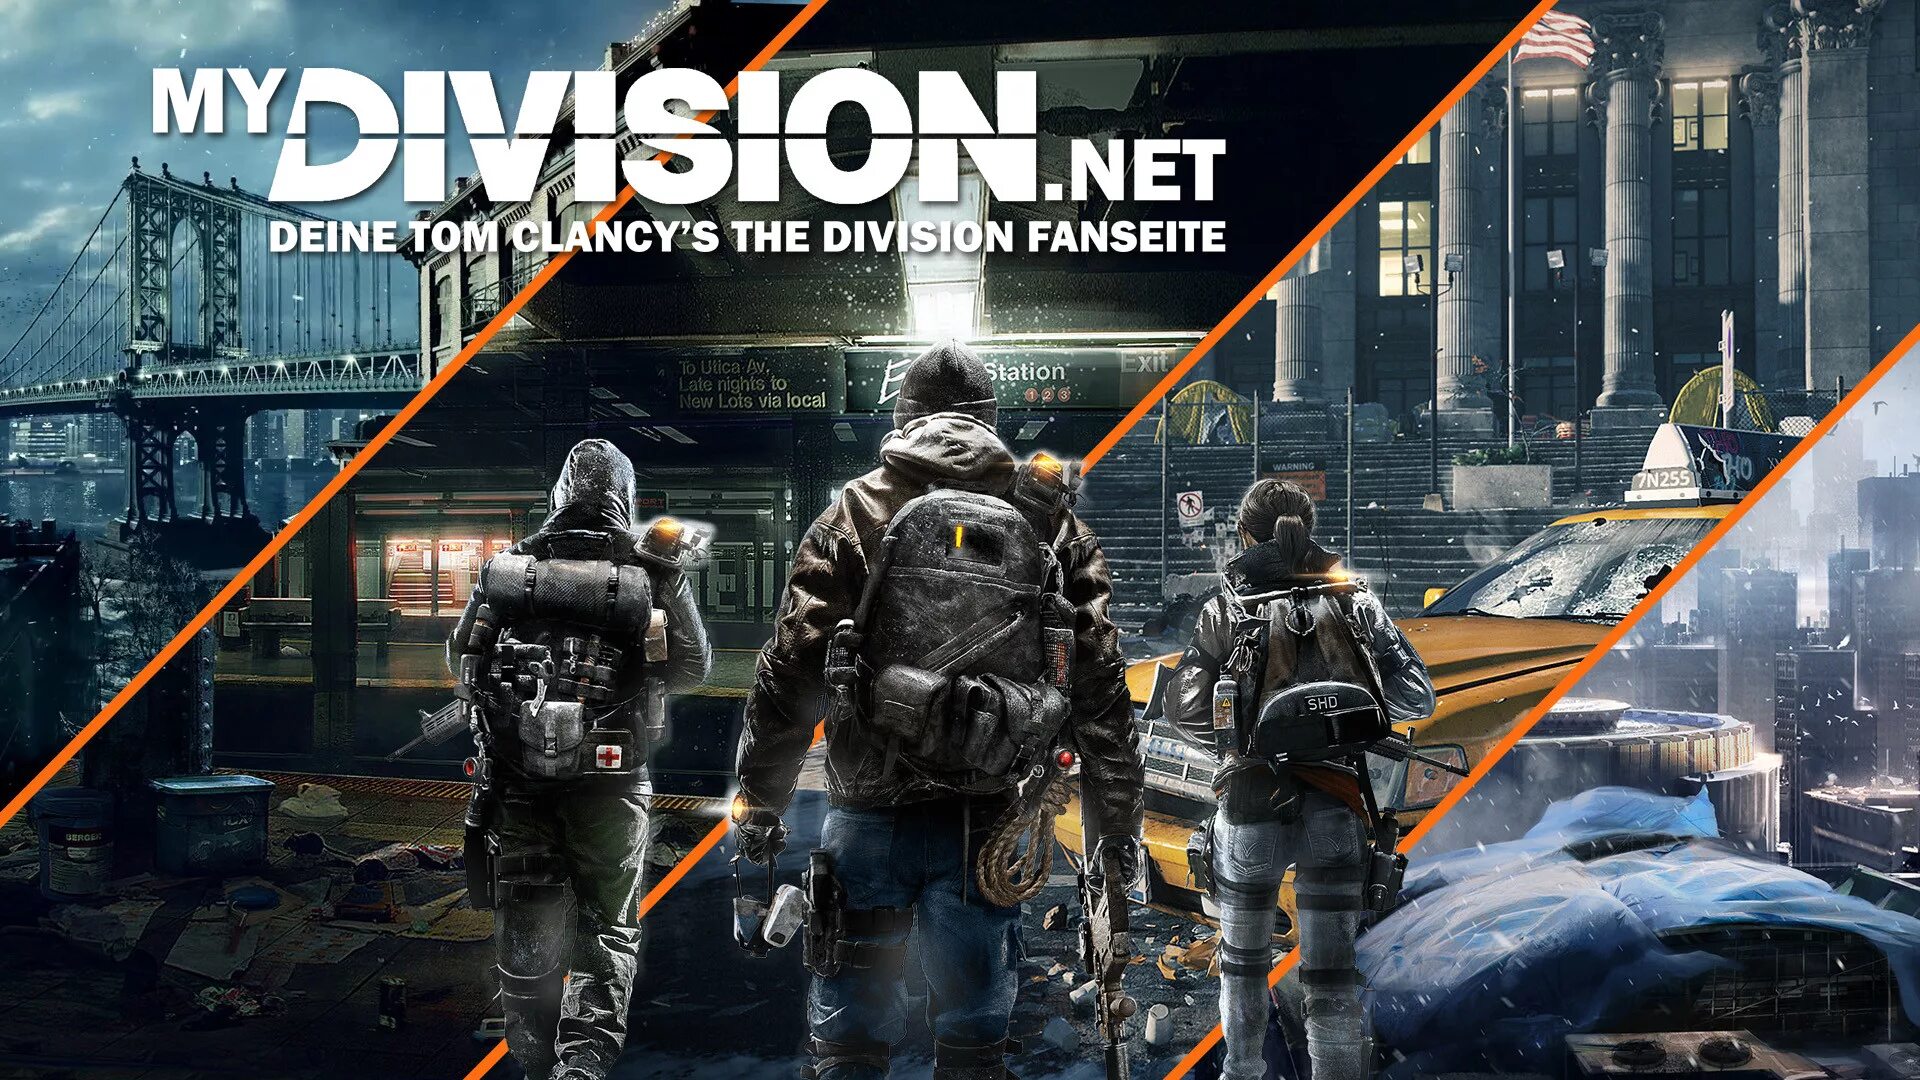 Tom clancy на андроид. Tom Clancy’s the Division 2. Том Клэнси the Division 2. Tom Clancy's the Division 2 Постер. Tom Clancy's the Division #4.